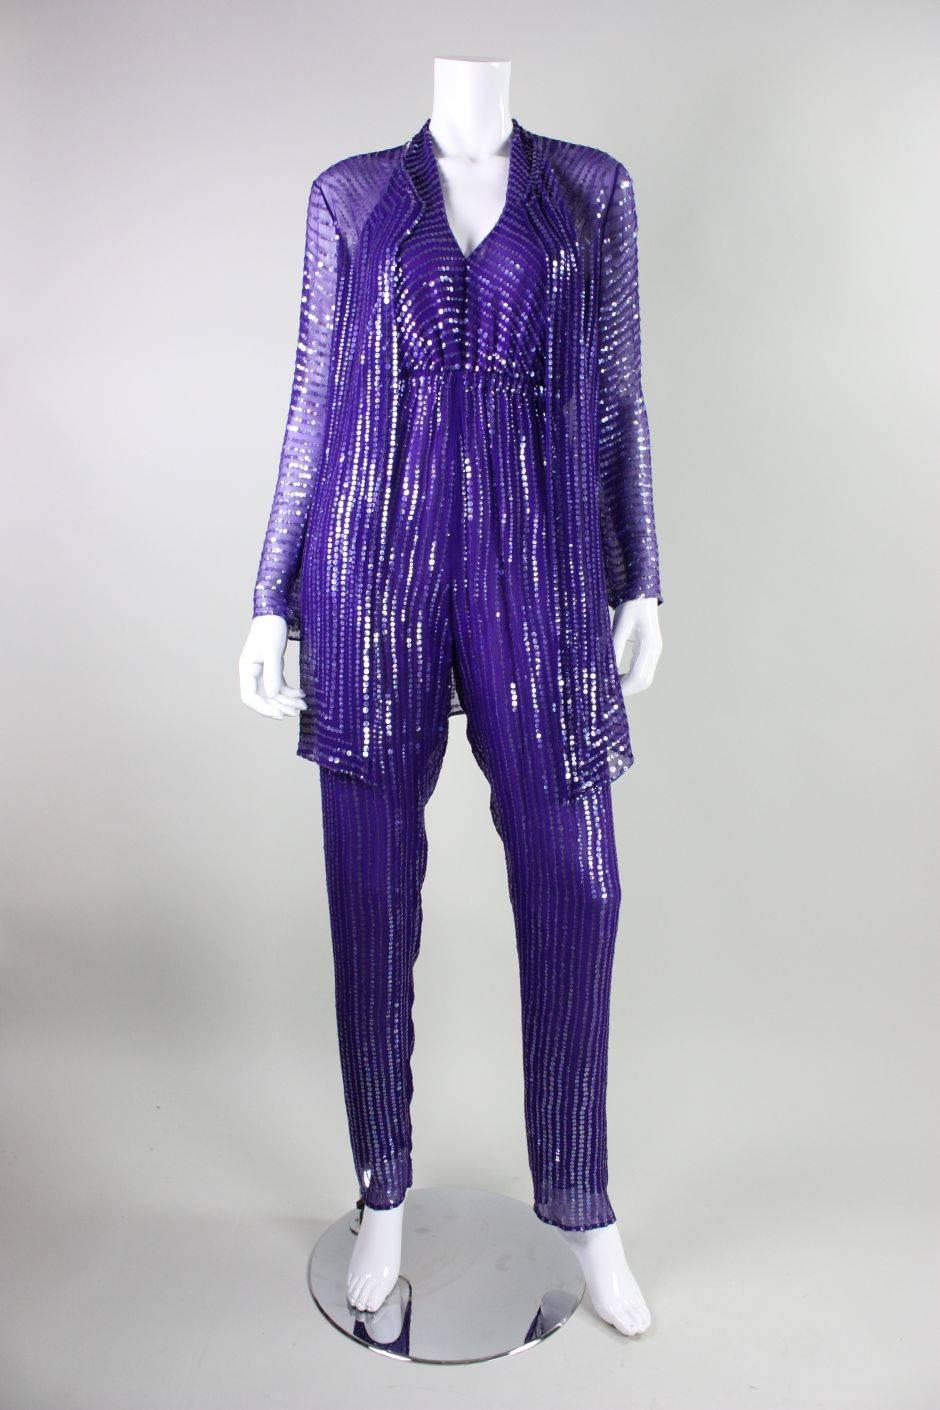 Vintage jumpsuit & jacket ensemble from Halston is made of purple silk chiffon that is covered with  vertical rows of hand-sewn iridescent sequins.  Jumpsuit has plunging halter neckline, open back, elasticized waistband, and center back hook